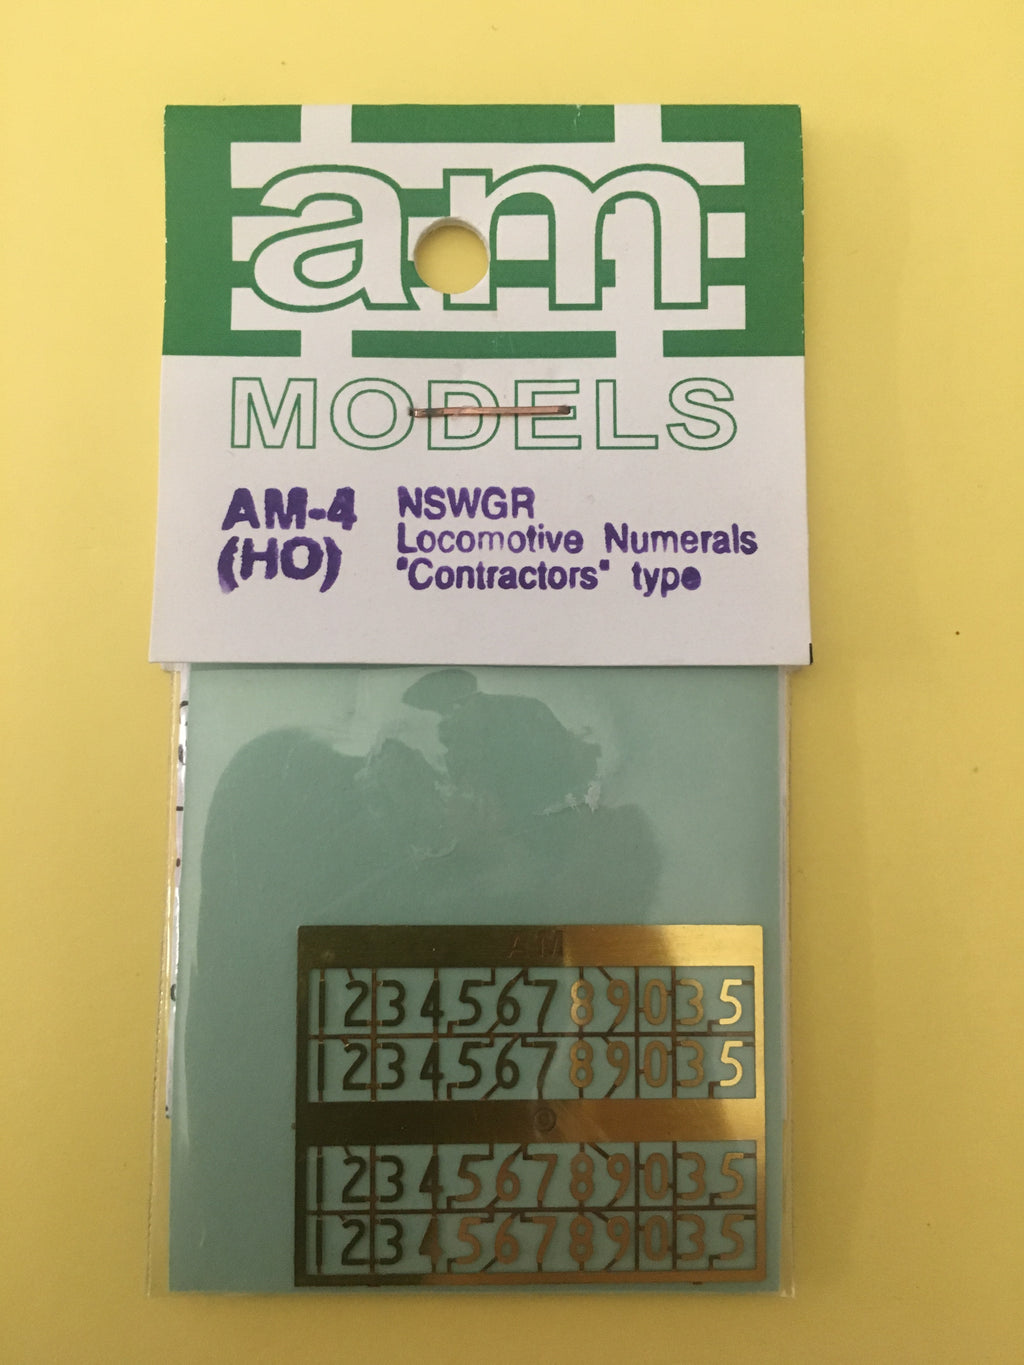 AM Models : AM-4 NSWGR Standard Loco Numeral-"Contractors" type - Etch Brass